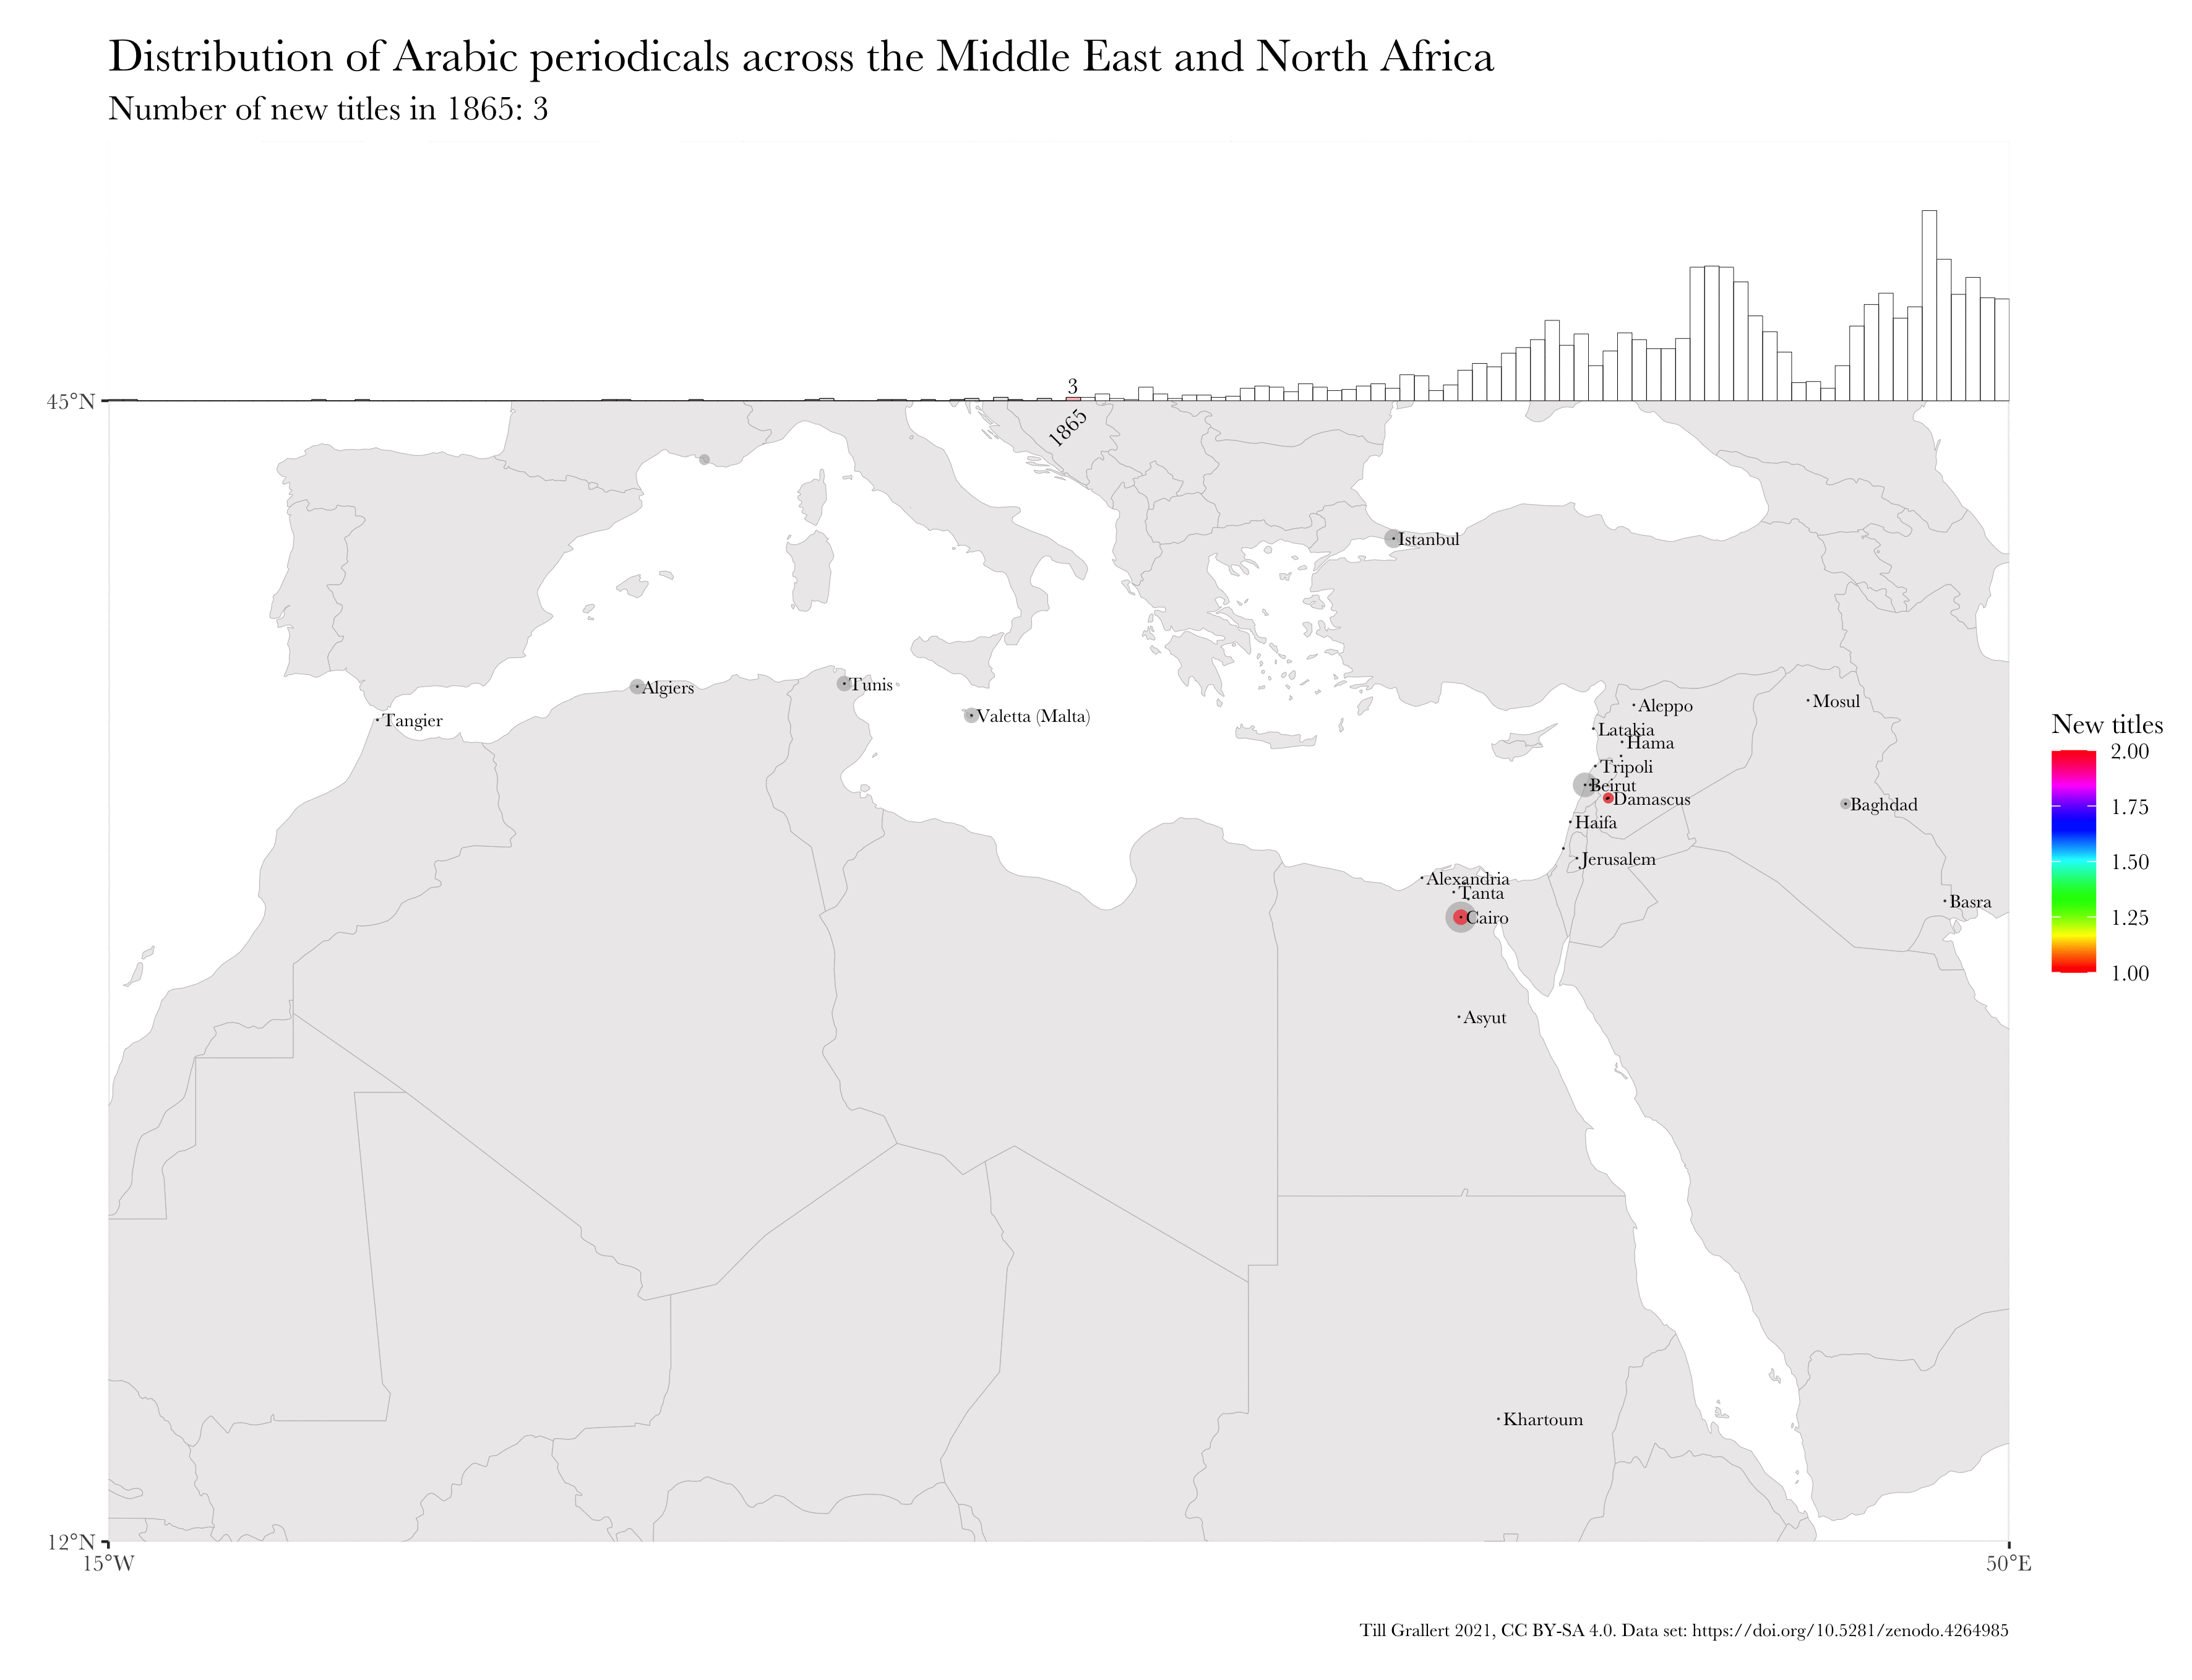 Distribution of new Arabic periodicals across the Middle East and North Africa between 1865 and 1929. Showing annual growth and summary since the onset of the Arabic periodical press in 1799.